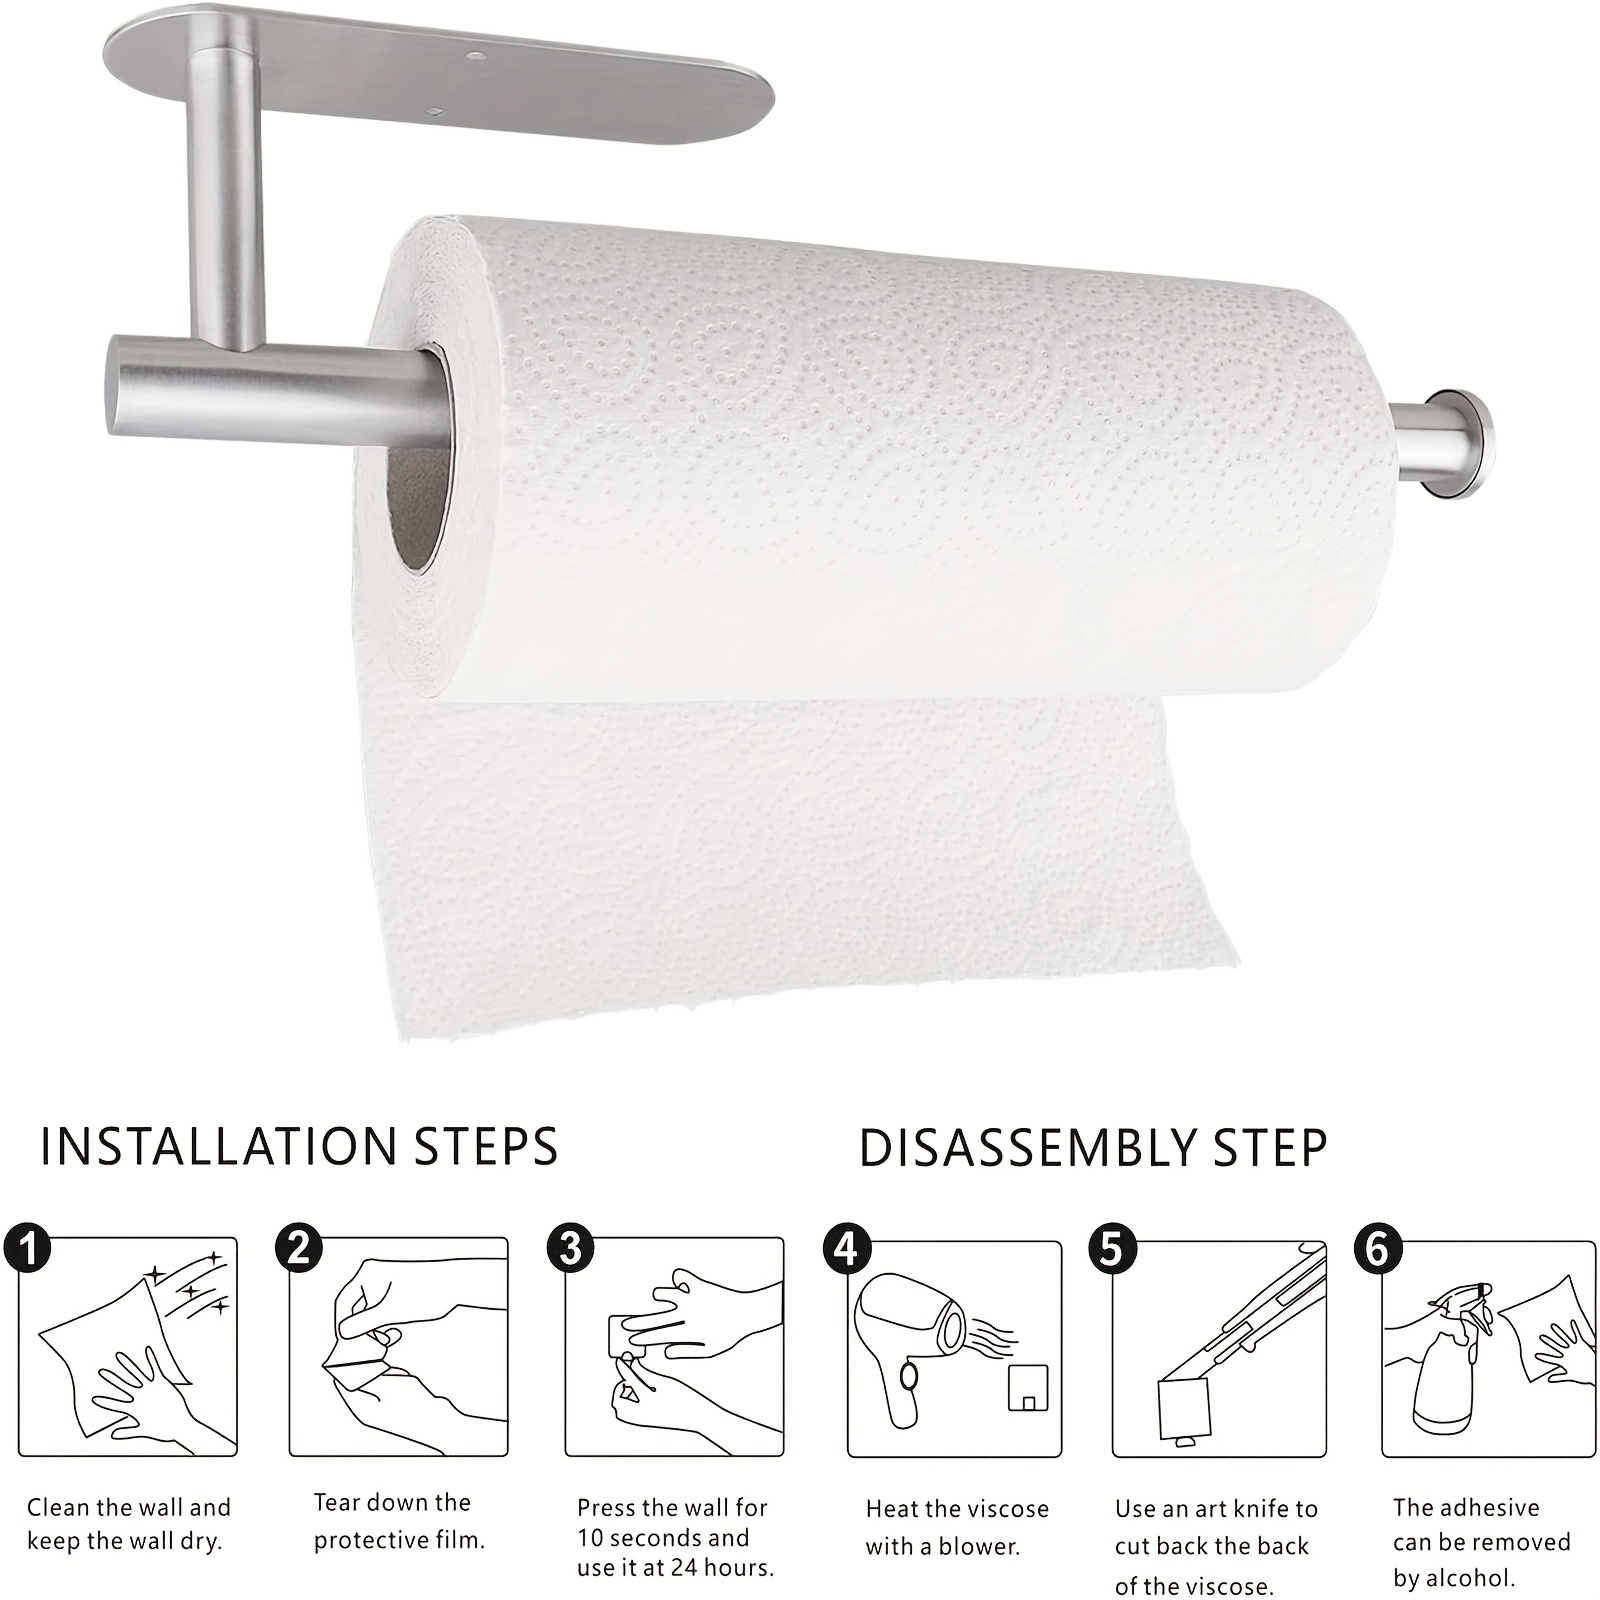 Durable Self-adhesive Paper Towel Holder That Can Be Used Under